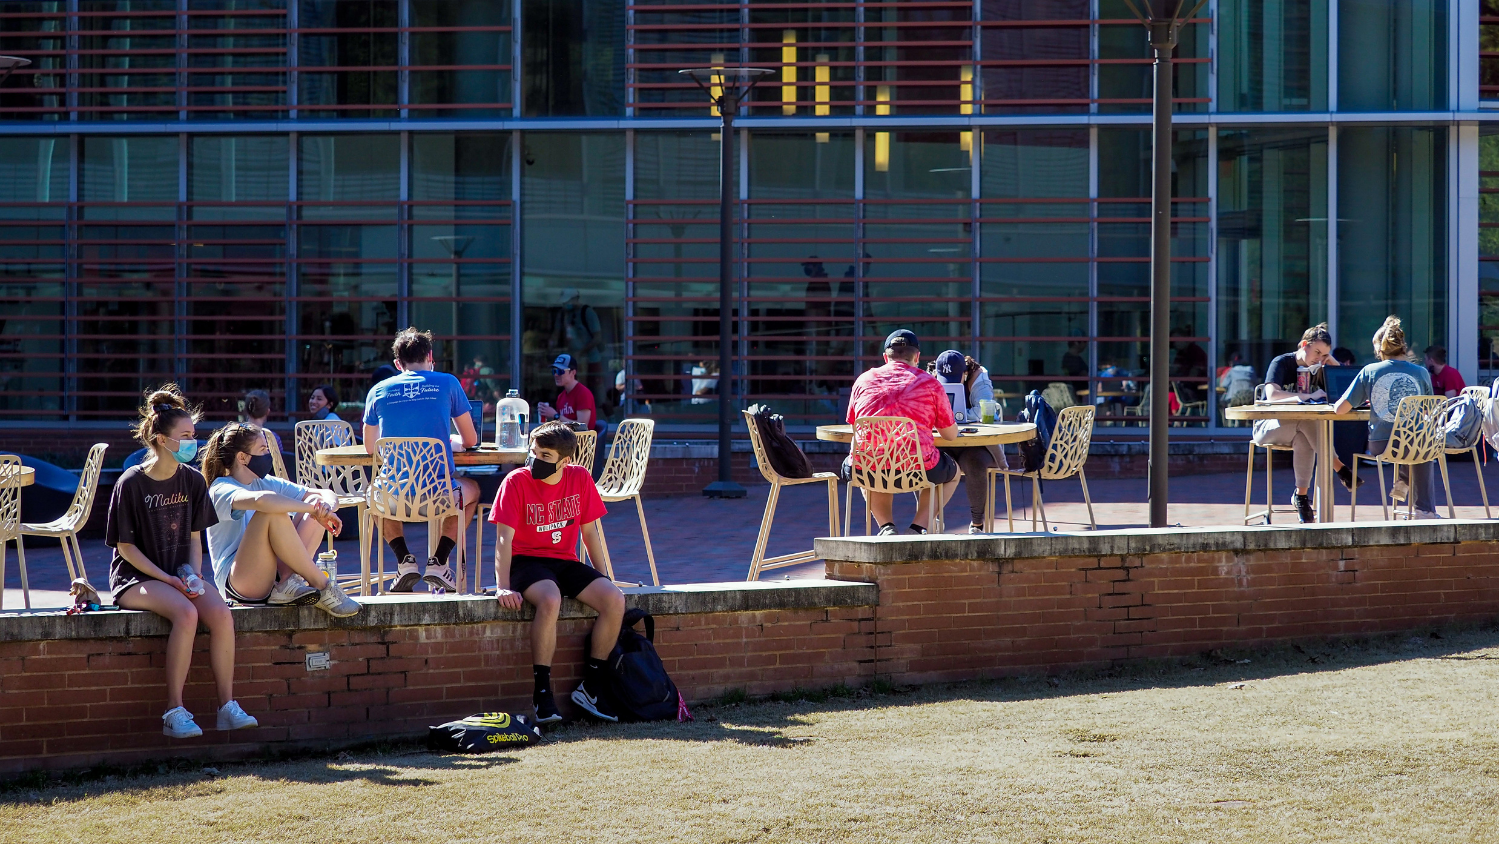 Students picnic in the warm sun at the Court of North Carolina as pleasant weather arrives for the spring 2021 semester.